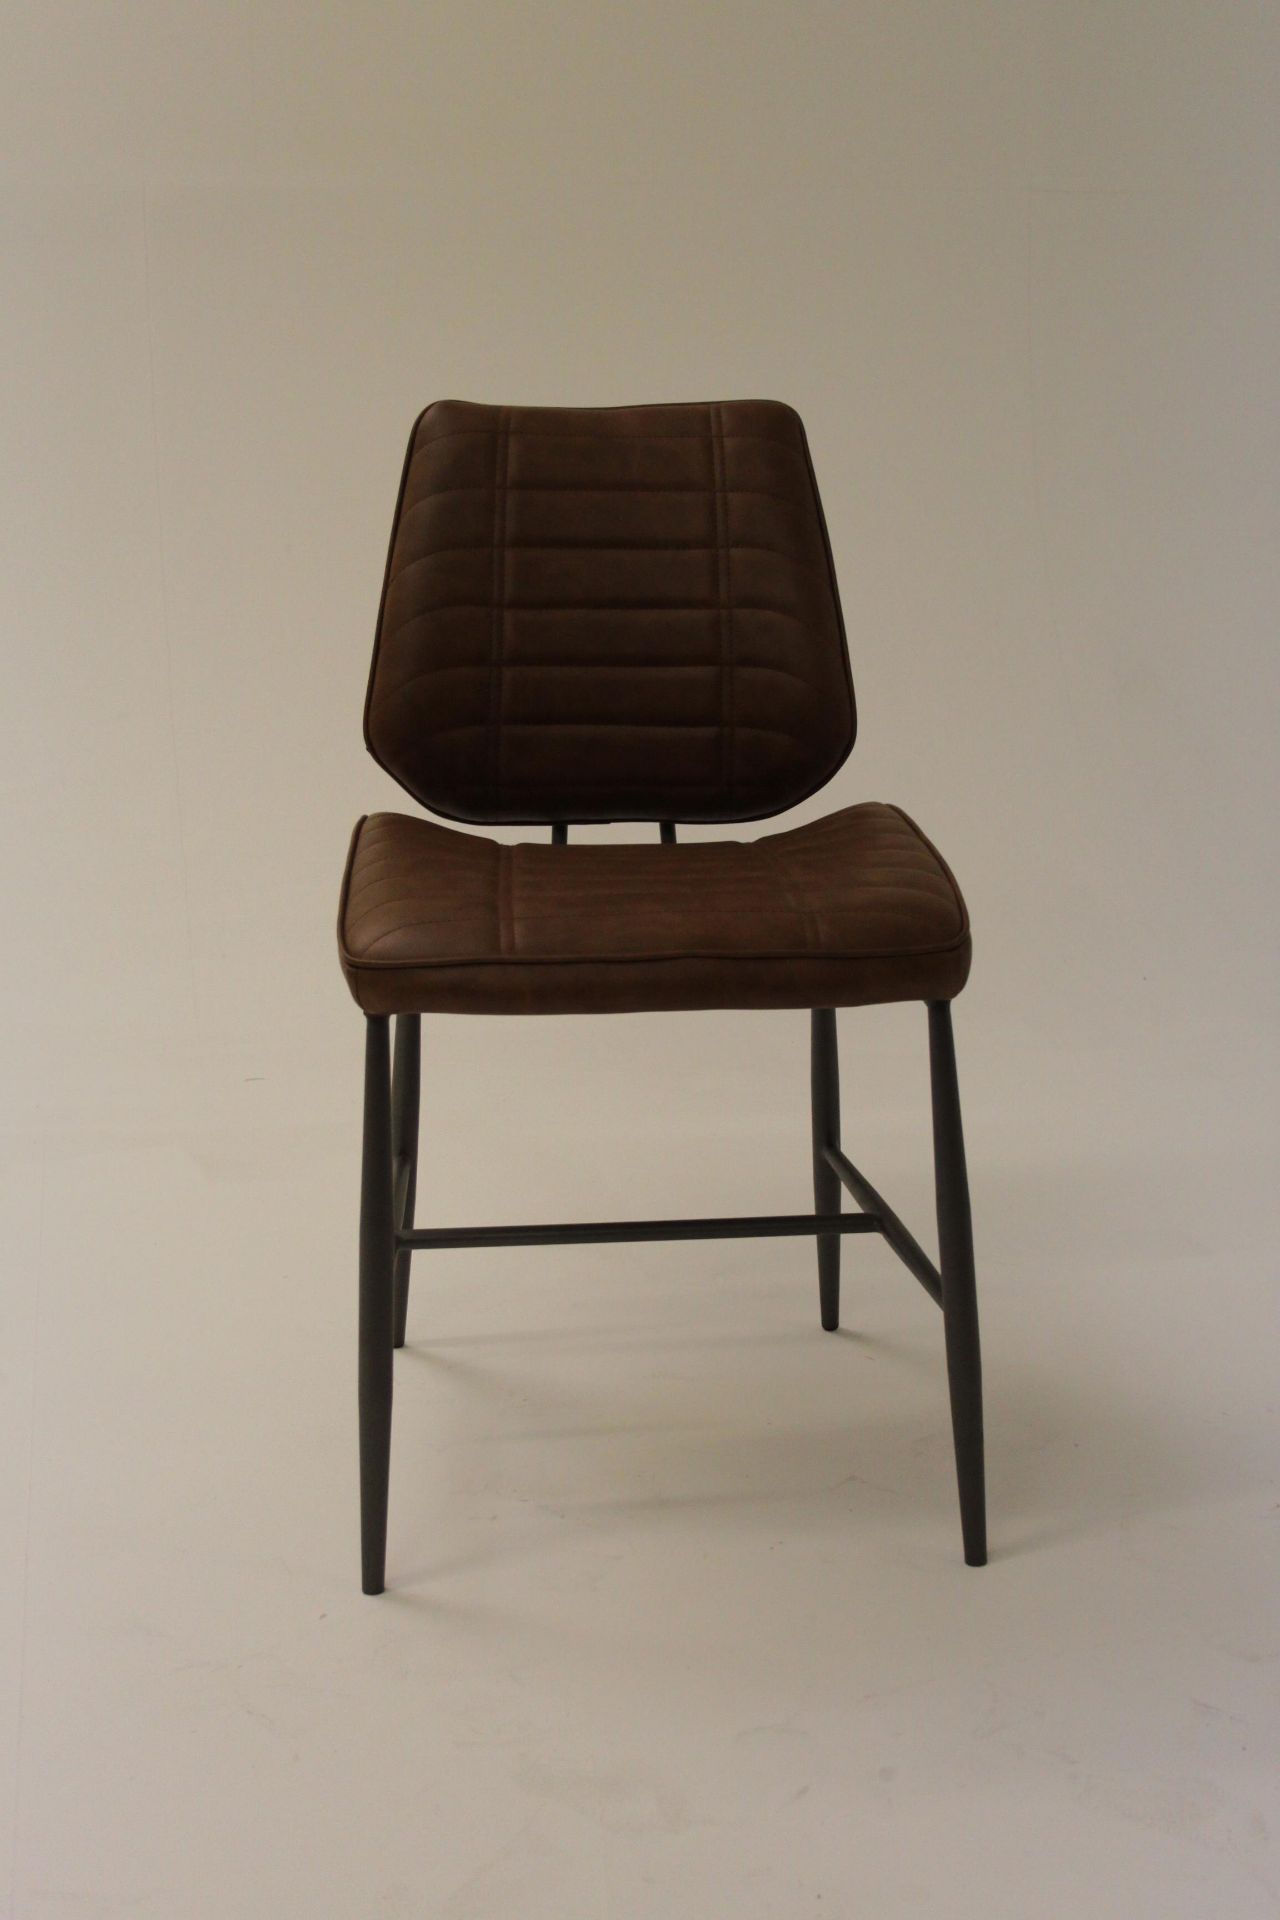 Cortina Chair Tan Inspired By Classic Car Seat Design These Chairs A Modern Stylish Appeal High